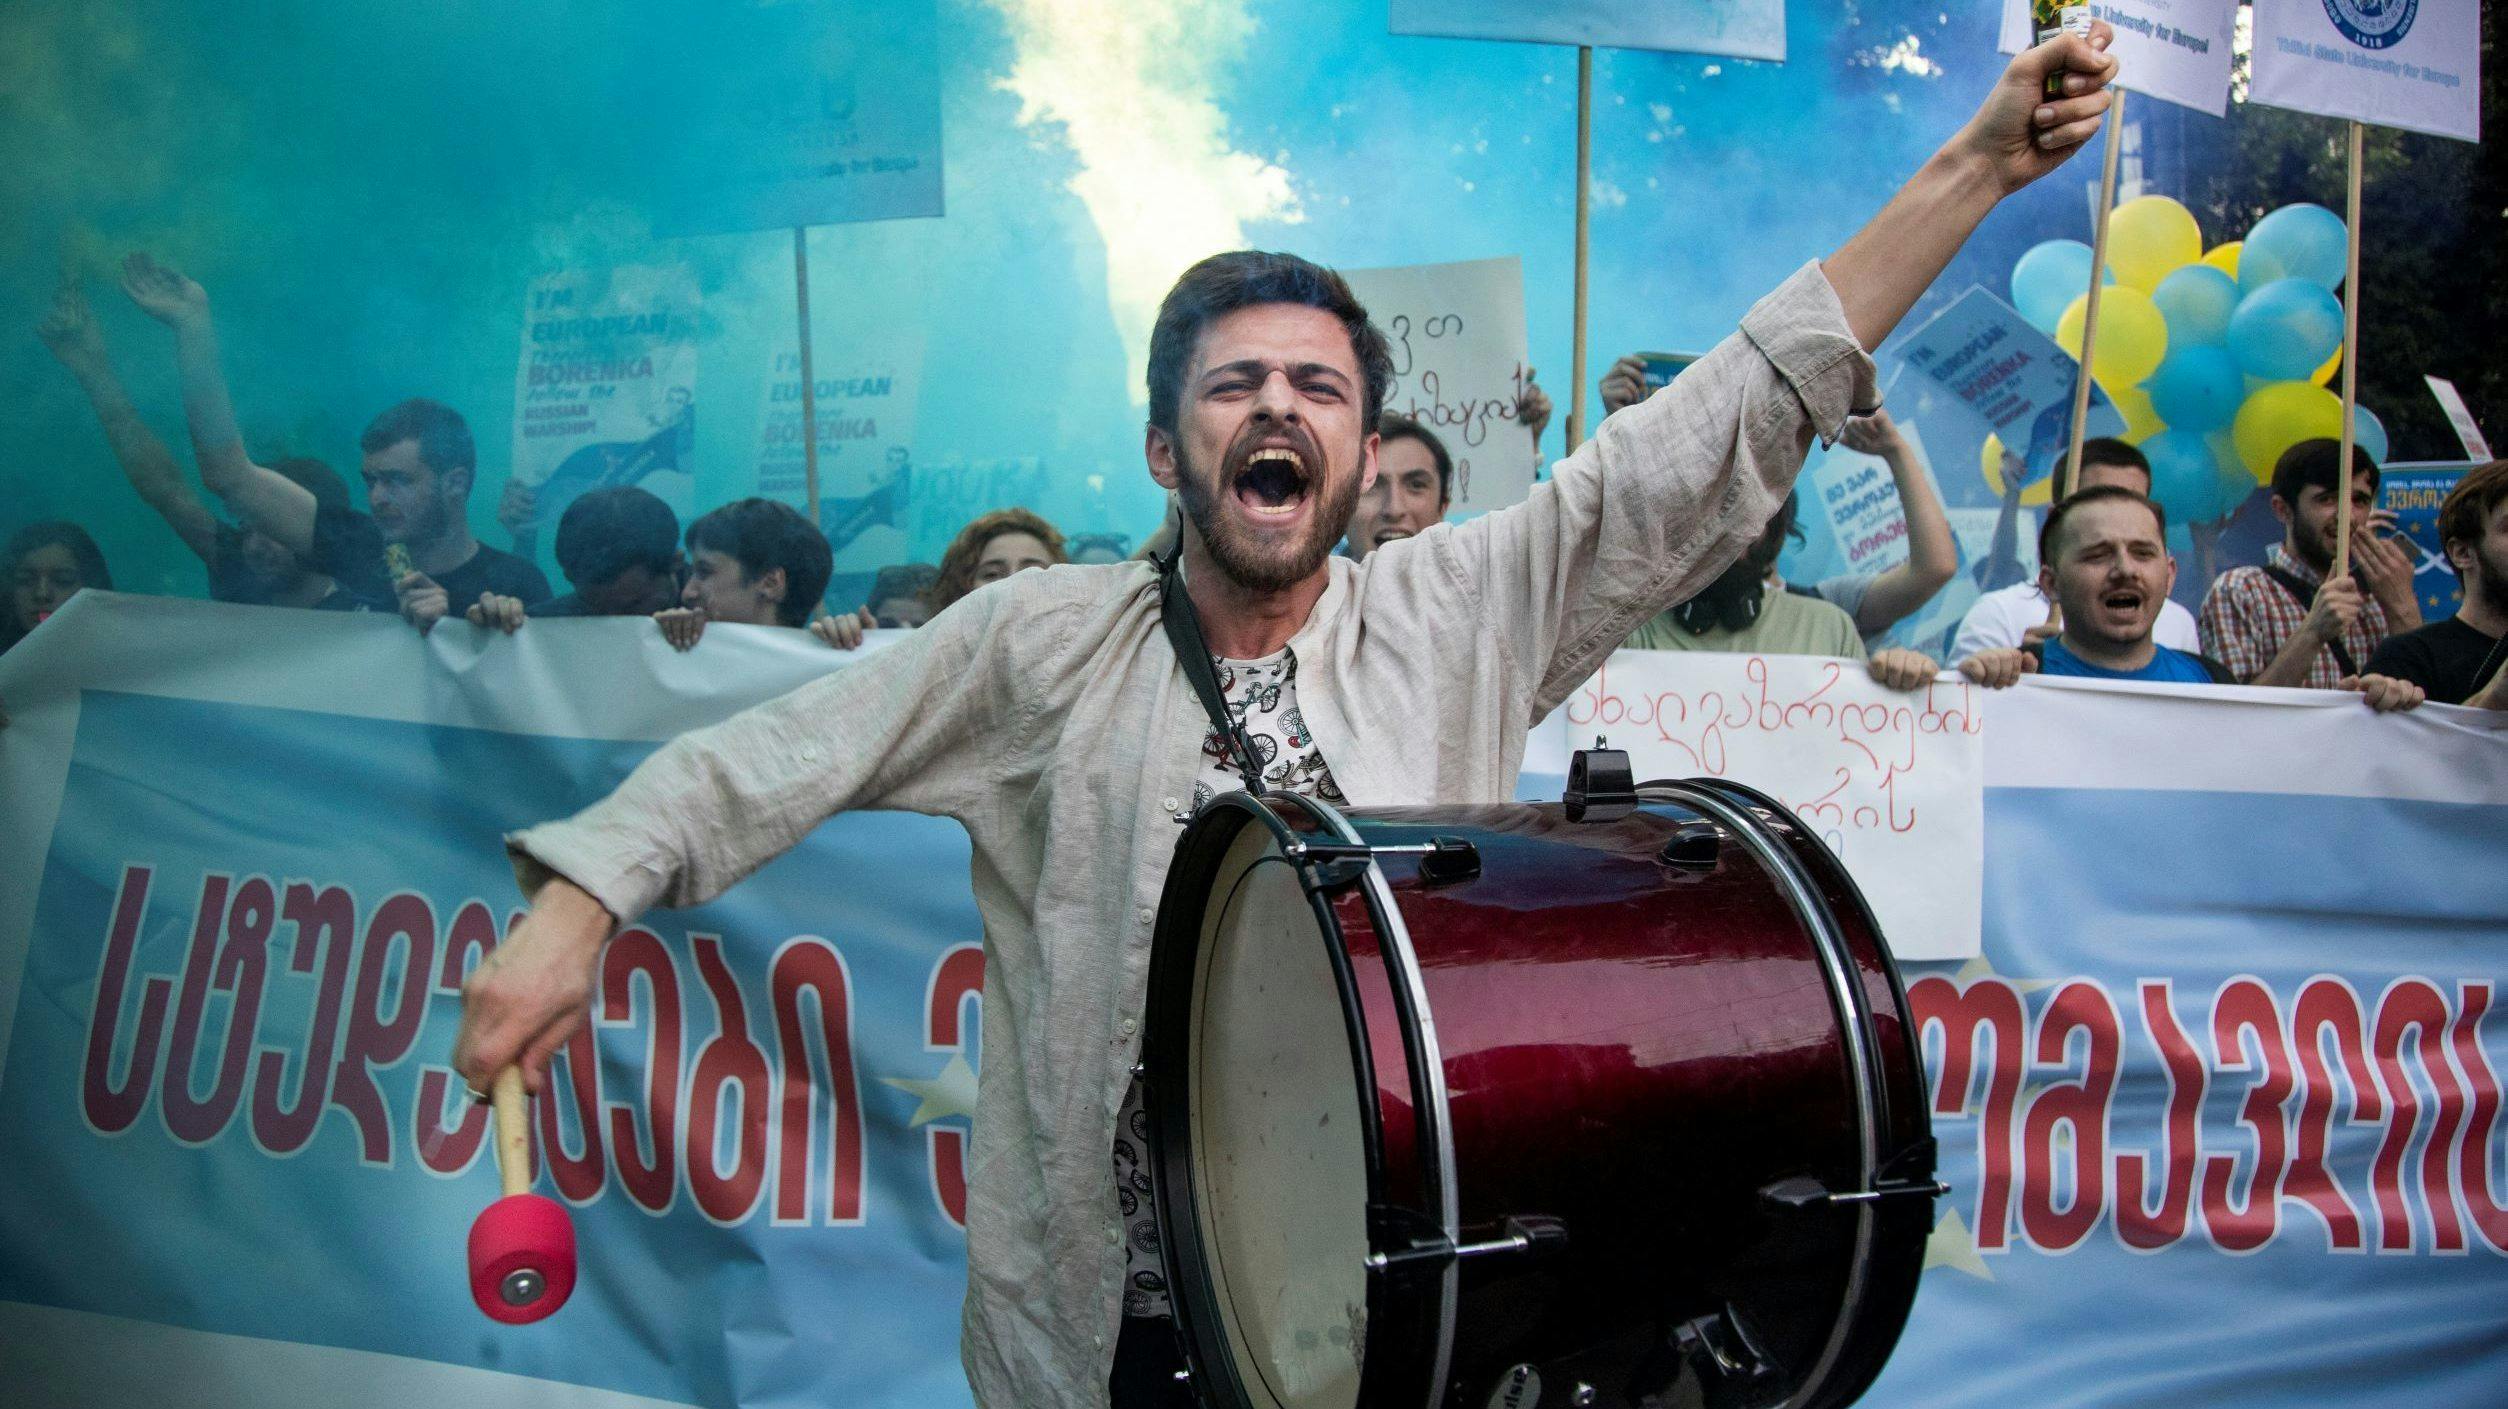 A man beats a drum and yells during a rally to support Georgia's bid to join the EU.